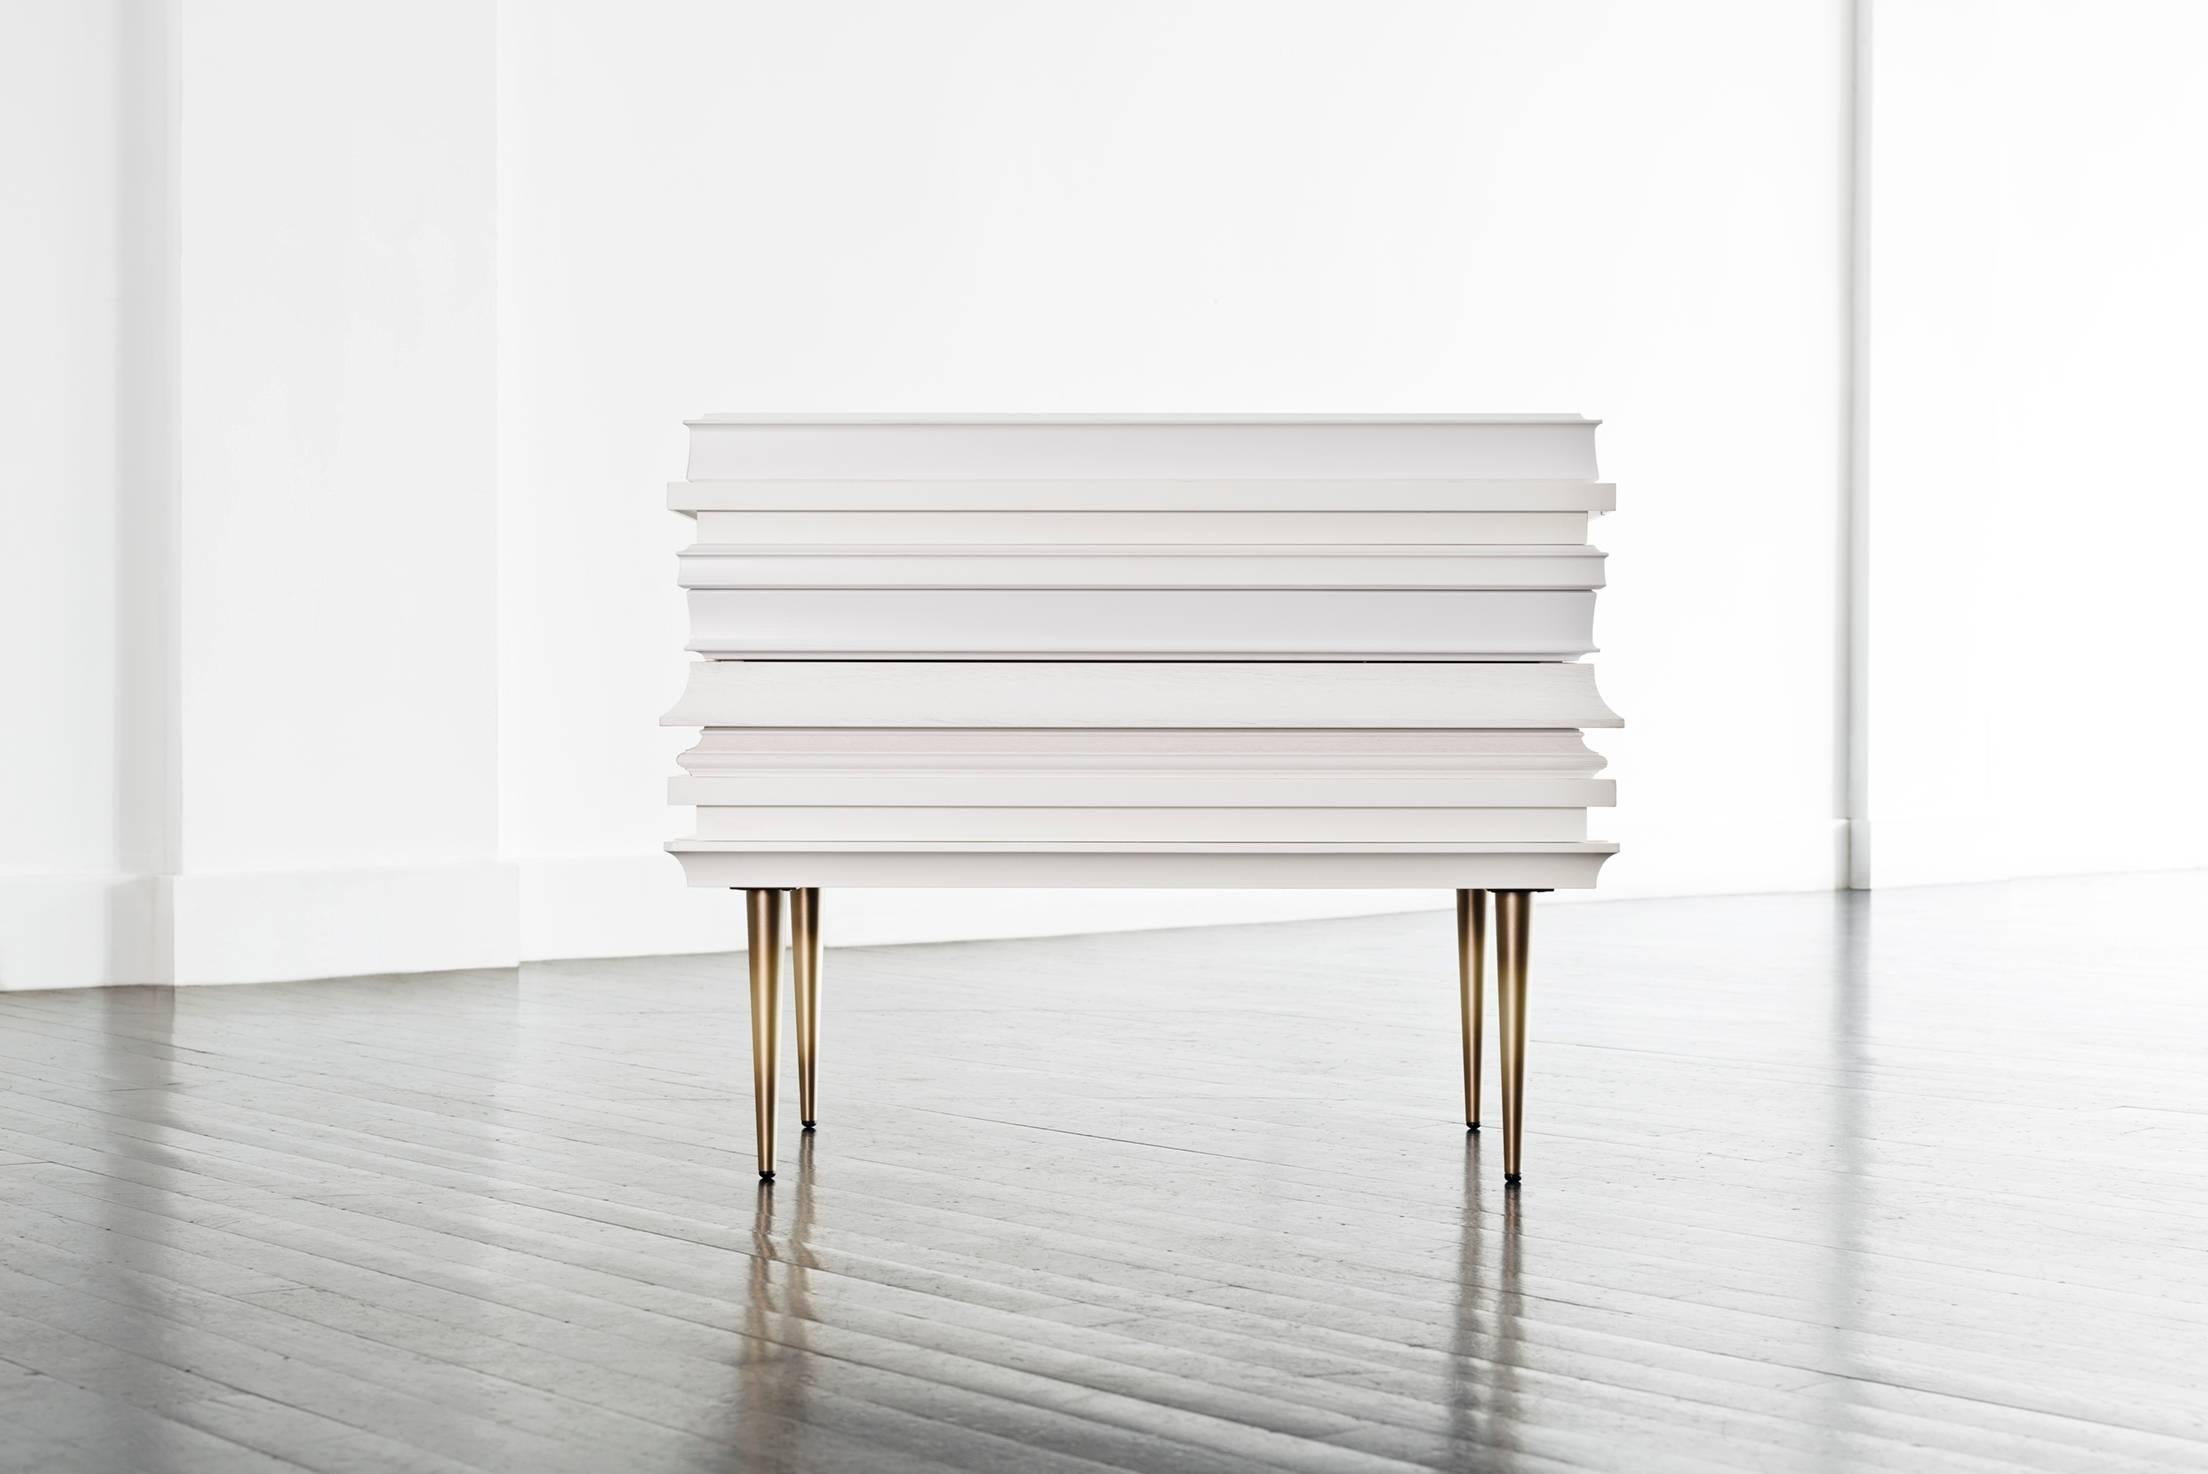 Frame nightstand white.
FRA-03B frame collection.
Design by Luis Pons.
Two drawers nightstand featuring a walnut finish interior. Antique bronze steel legs. White finish Frame segments.
Measures: 27” W x 23” H x 17” D,
69 cm W x 59 cm H x 44 cm